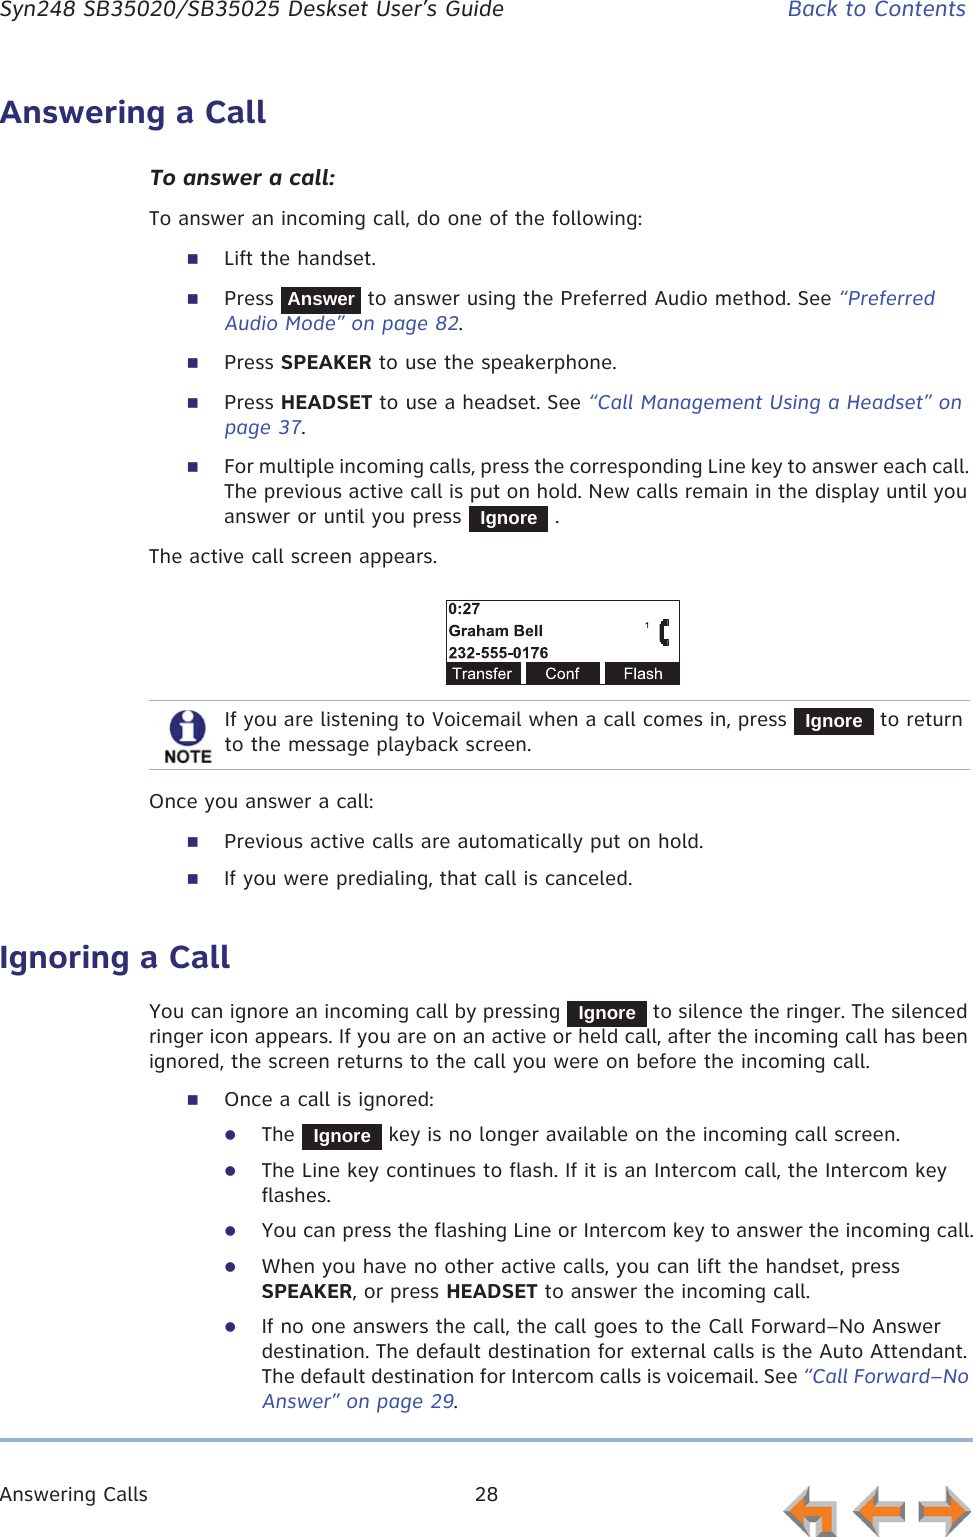 Answering Calls 28      Syn248 SB35020/SB35025 Deskset User’s Guide Back to ContentsAnswering a CallTo answer a call:To answer an incoming call, do one of the following:Lift the handset.Press   to answer using the Preferred Audio method. See “Preferred Audio Mode” on page 82.Press SPEAKER to use the speakerphone.Press HEADSET to use a headset. See “Call Management Using a Headset” on page 37.For multiple incoming calls, press the corresponding Line key to answer each call. The previous active call is put on hold. New calls remain in the display until you answer or until you press   .The active call screen appears.Once you answer a call:Previous active calls are automatically put on hold.If you were predialing, that call is canceled.Ignoring a CallYou can ignore an incoming call by pressing   to silence the ringer. The silenced ringer icon appears. If you are on an active or held call, after the incoming call has been ignored, the screen returns to the call you were on before the incoming call.Once a call is ignored:zThe   key is no longer available on the incoming call screen.zThe Line key continues to flash. If it is an Intercom call, the Intercom key flashes.zYou can press the flashing Line or Intercom key to answer the incoming call.zWhen you have no other active calls, you can lift the handset, press SPEAKER, or press HEADSET to answer the incoming call.zIf no one answers the call, the call goes to the Call Forward–No Answer destination. The default destination for external calls is the Auto Attendant. The default destination for Intercom calls is voicemail. See “Call Forward–No Answer” on page 29.AnswerIgnoreIf you are listening to Voicemail when a call comes in, press   to return to the message playback screen.IgnoreIgnoreIgnore